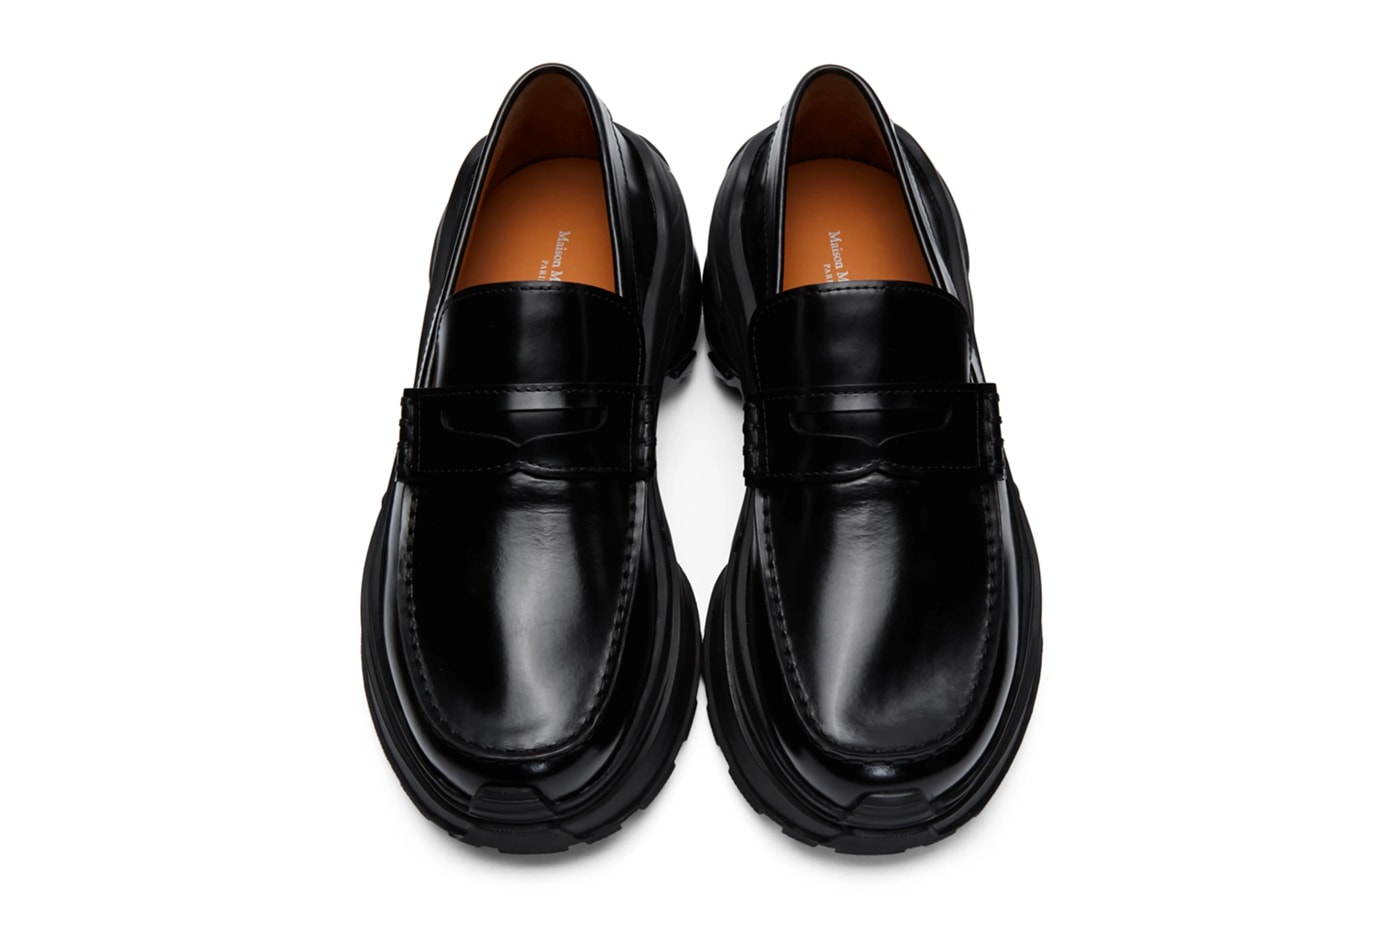 Maison Margiela Black Cross Loafers derby dress shoes footwear sneakers trainers runners leather penny atelier made in italy kicks sartorial bespoke polished reconstruction reworked